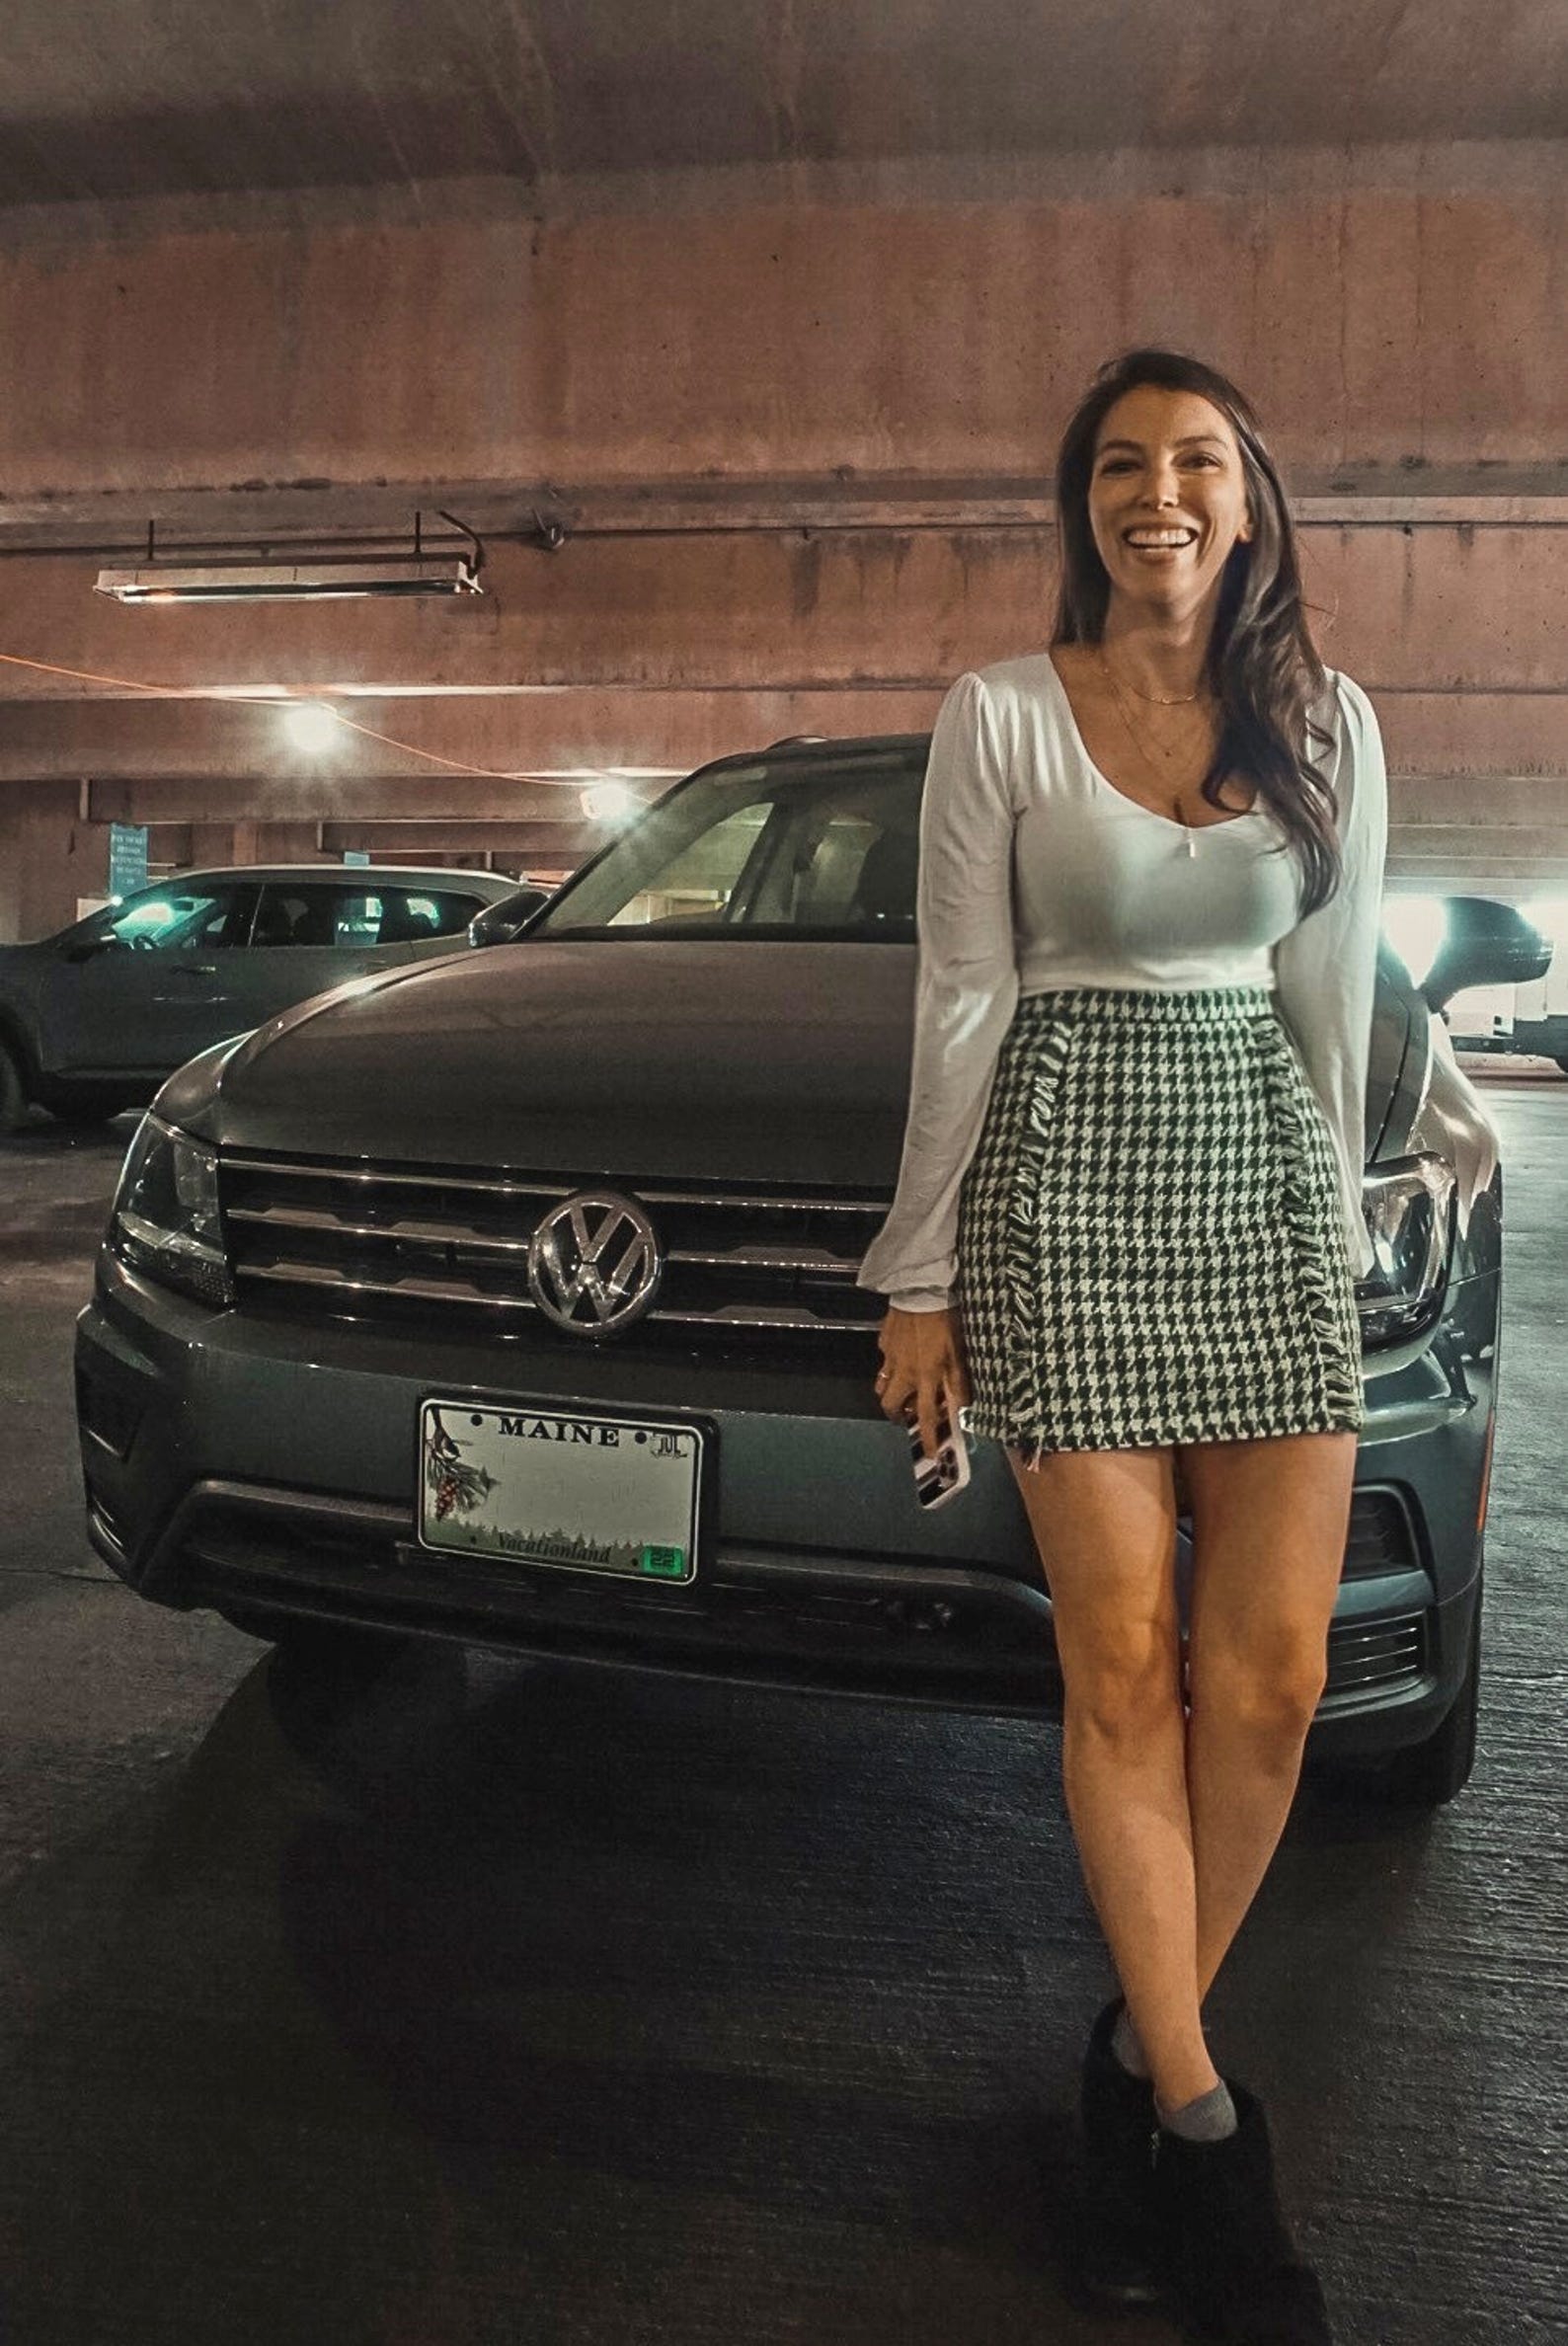 Sammie Herrick, a market researcher from Boston, visited several car dealerships in pursuit of a vegan interior in an SUV before finding the Volkswagen Tiguan SUV.